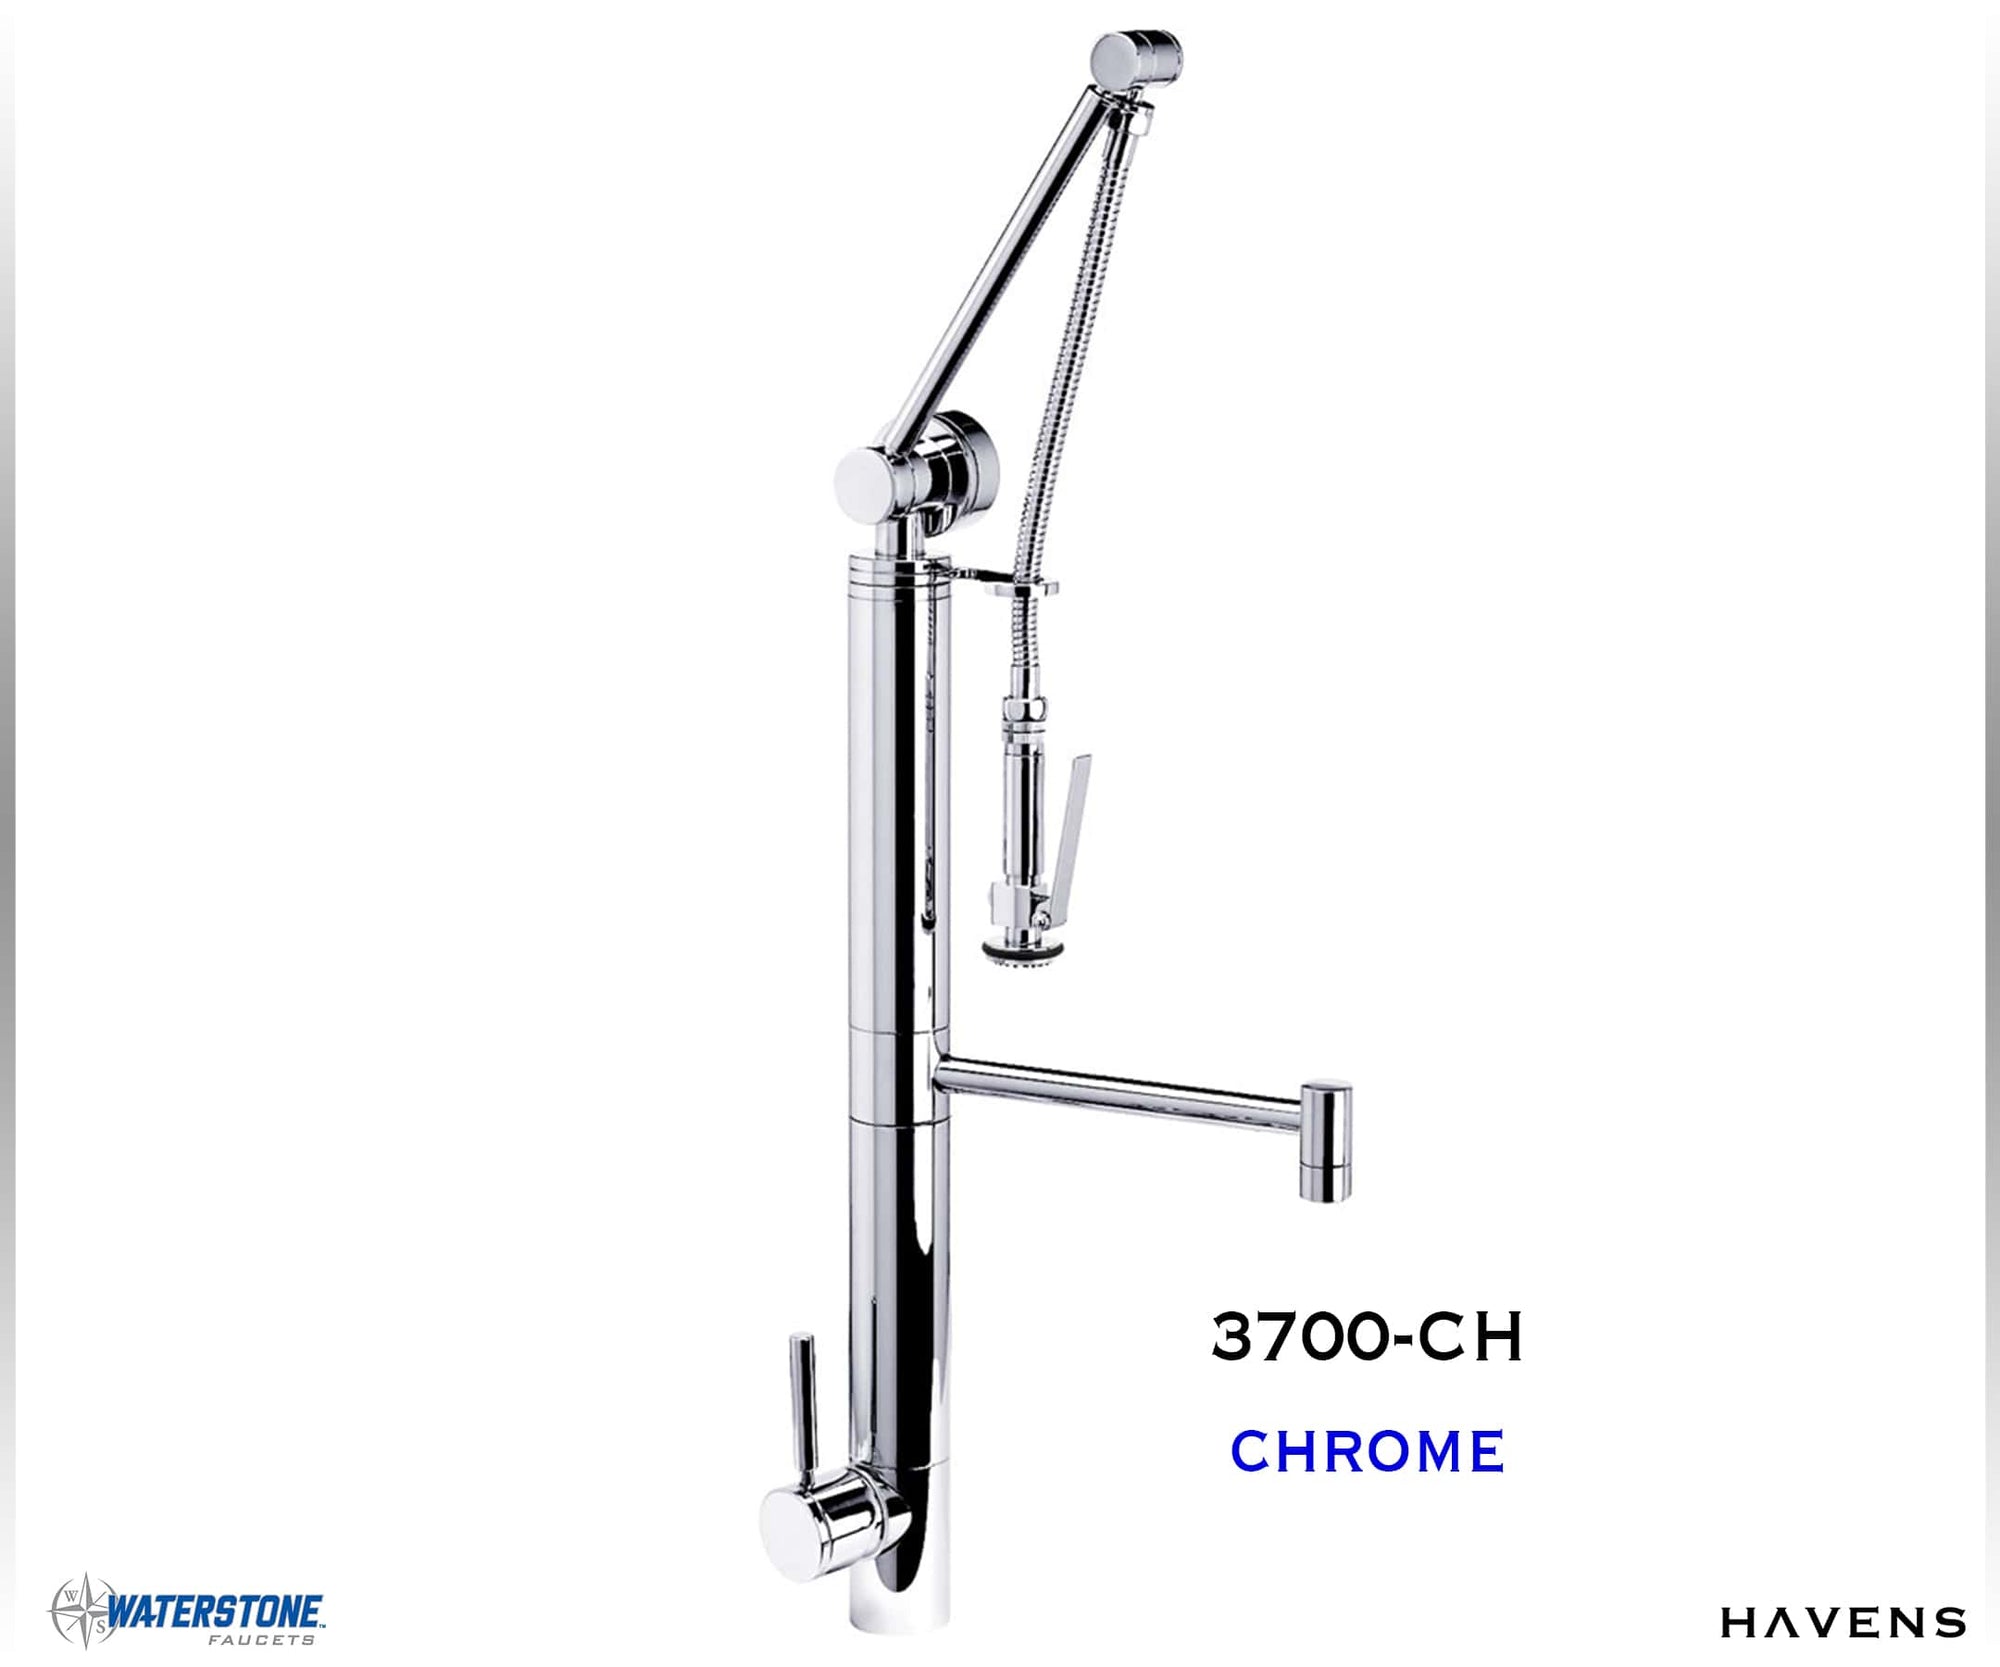 Waterstone Contemporary Gantry Faucet – Straight Spout 3700